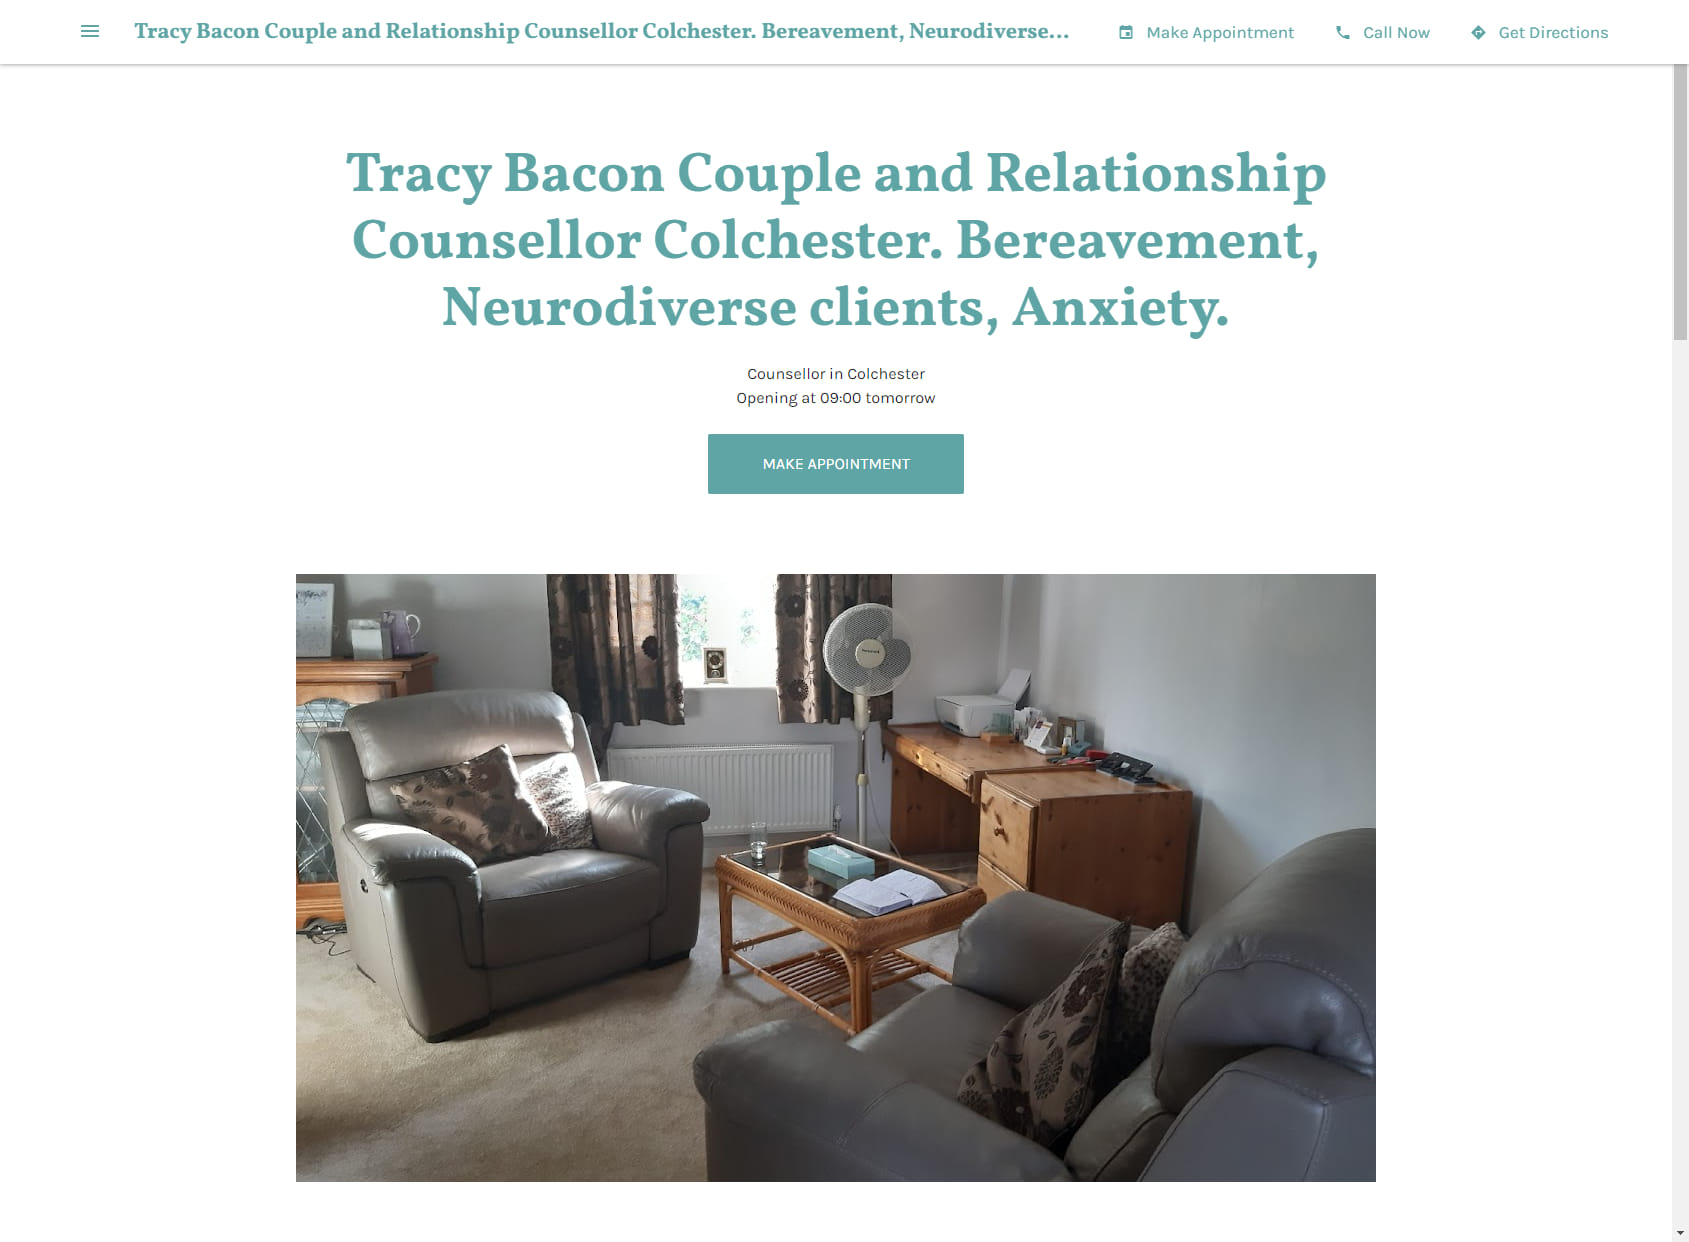 Tracy Bacon Couple and Relationship Counsellor Colchester. Bereavement, Neurodiverse clients, Anxiety.